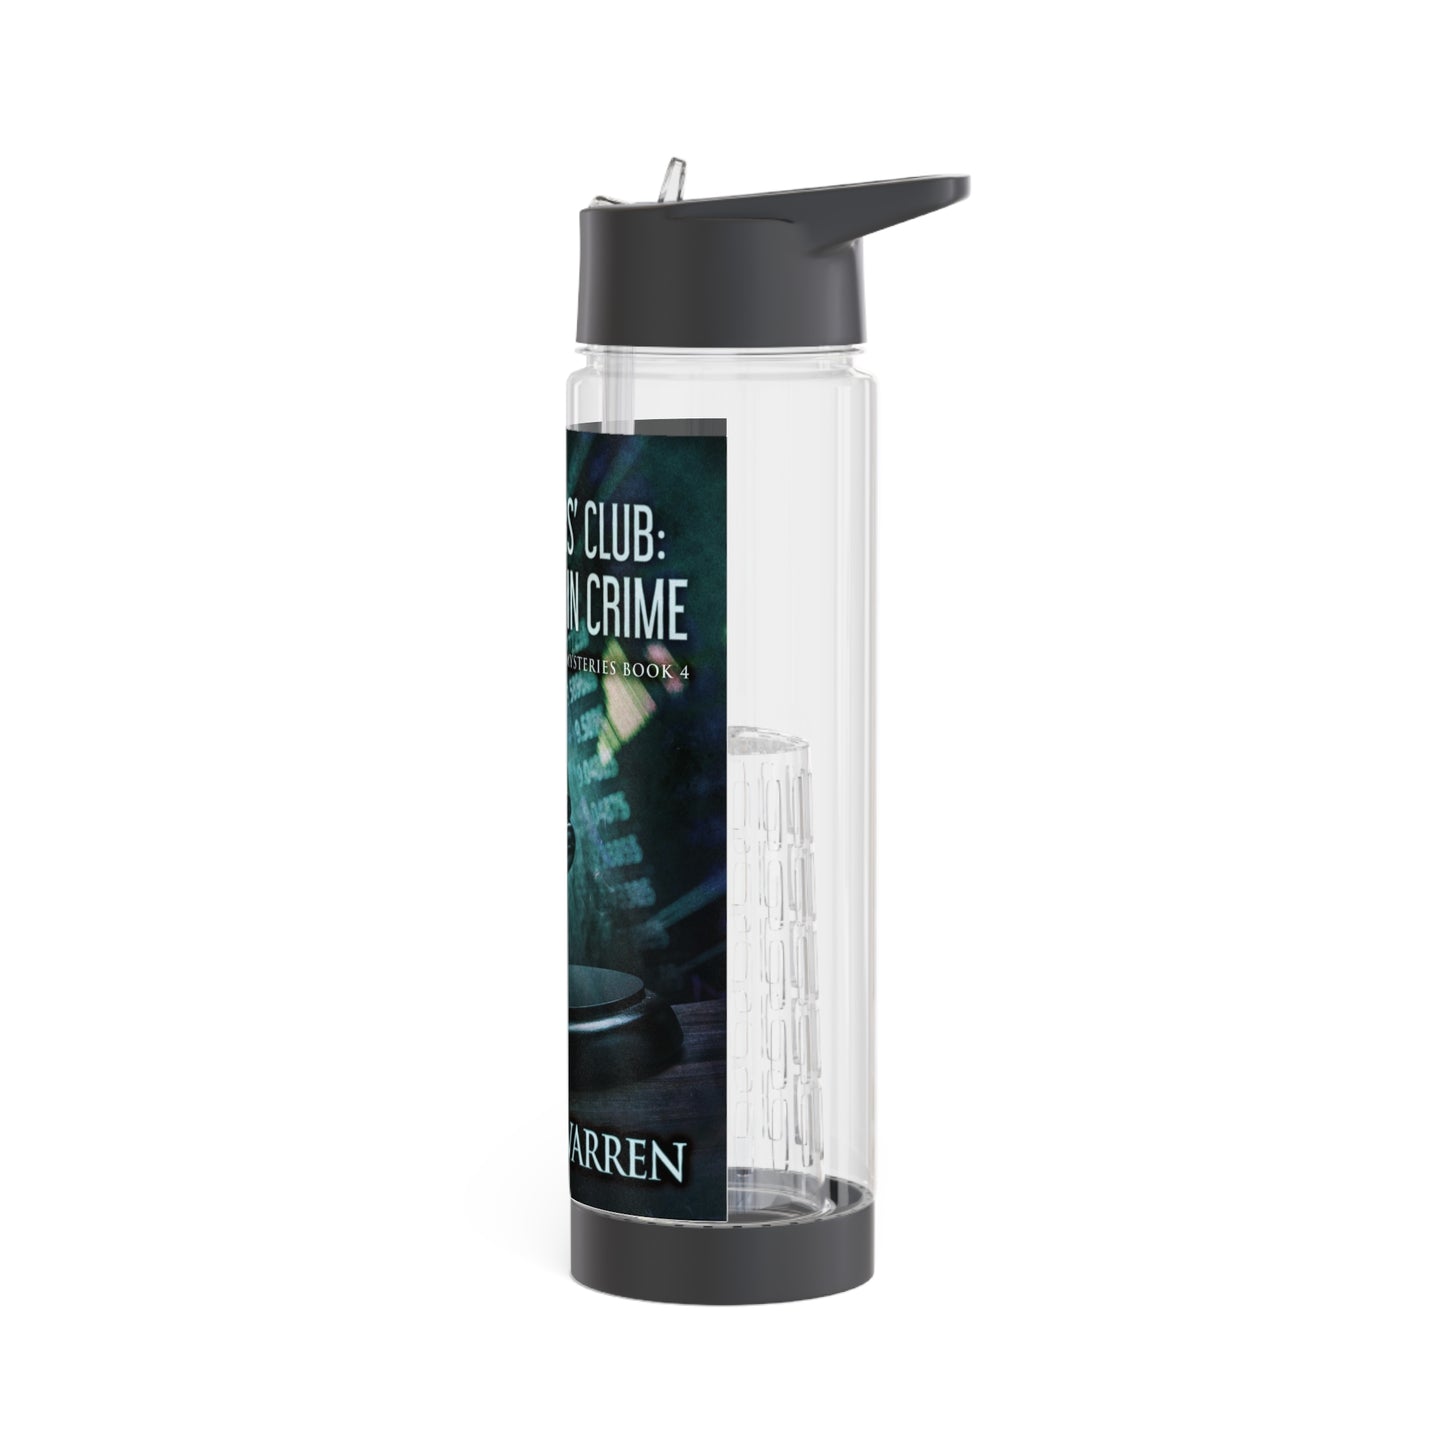 The Insiders' Club - Infuser Water Bottle